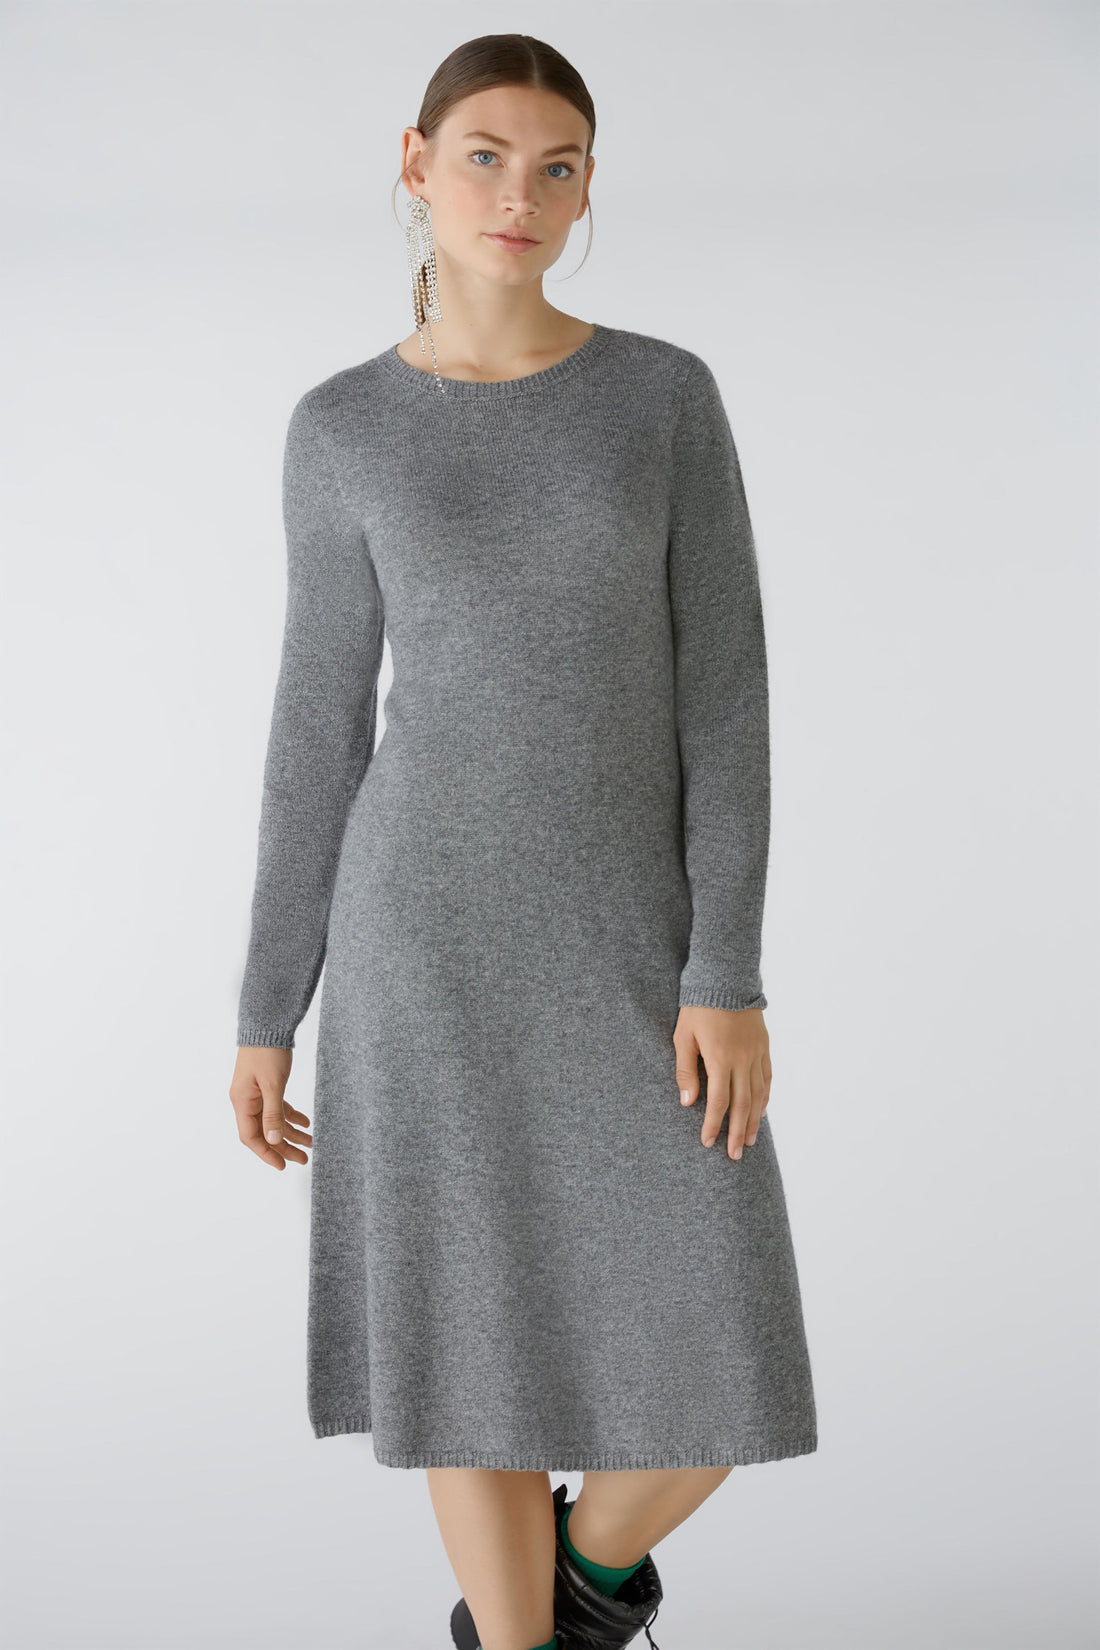 Knitted Dress Wool Blend With Modal_79699_9559_02